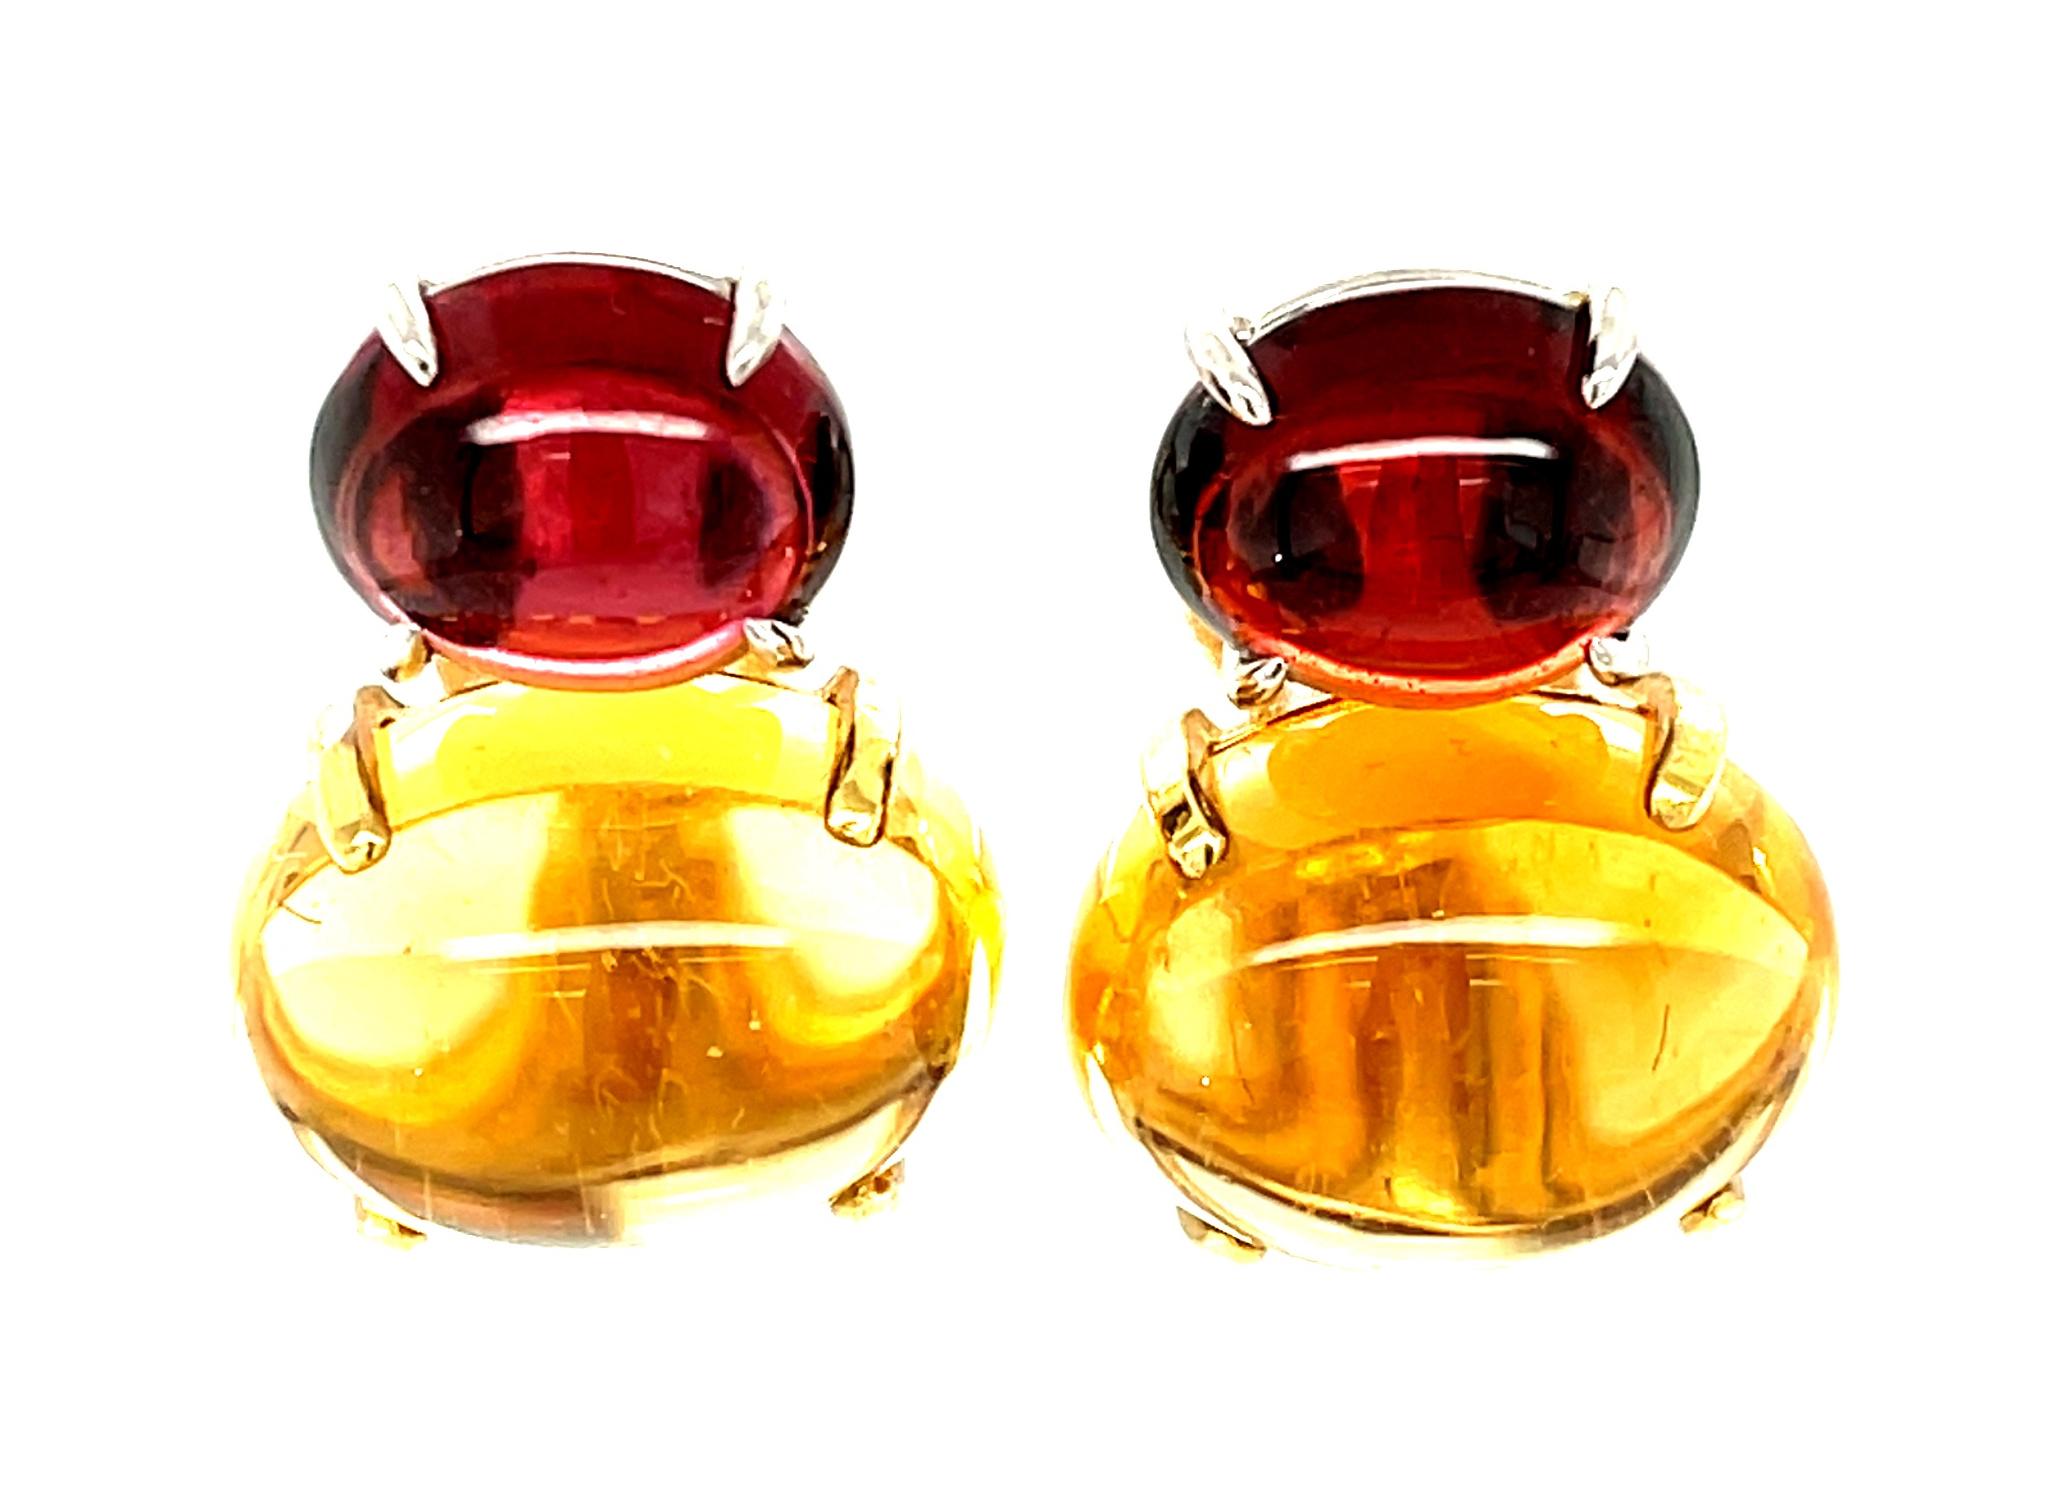 These striking earrings feature very large, golden citrine cabochons and burgundy-red garnet cabochons in a classic, warm color combination. Both the citrine and garnets are extremely clean and transparent, which is unusual for cabochons. Handmade